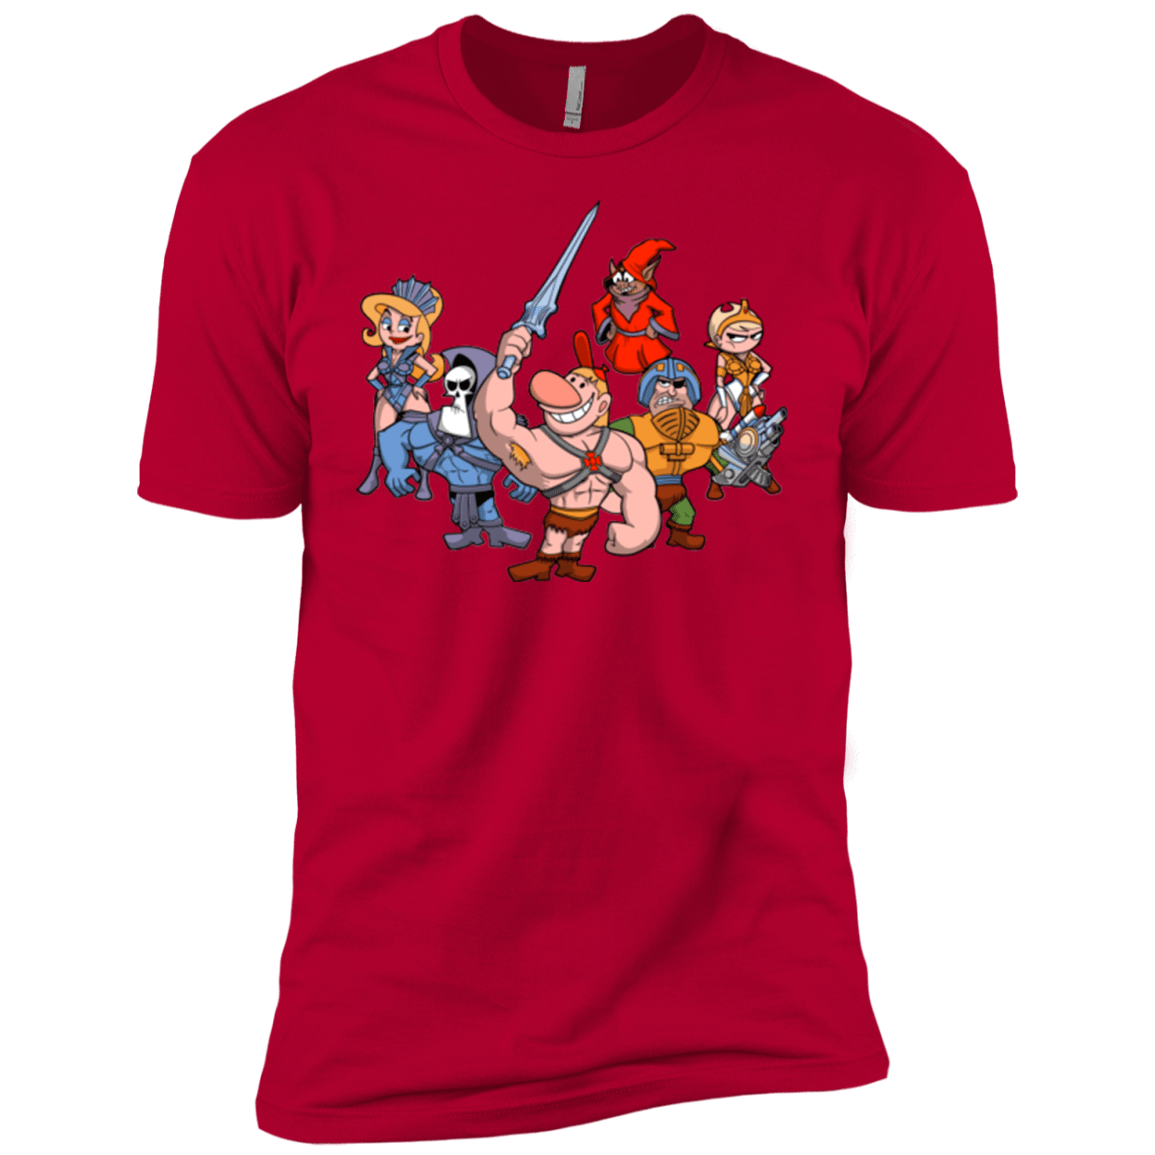 T-Shirts Red / YXS Masters of the Grimverse Boys Premium T-Shirt